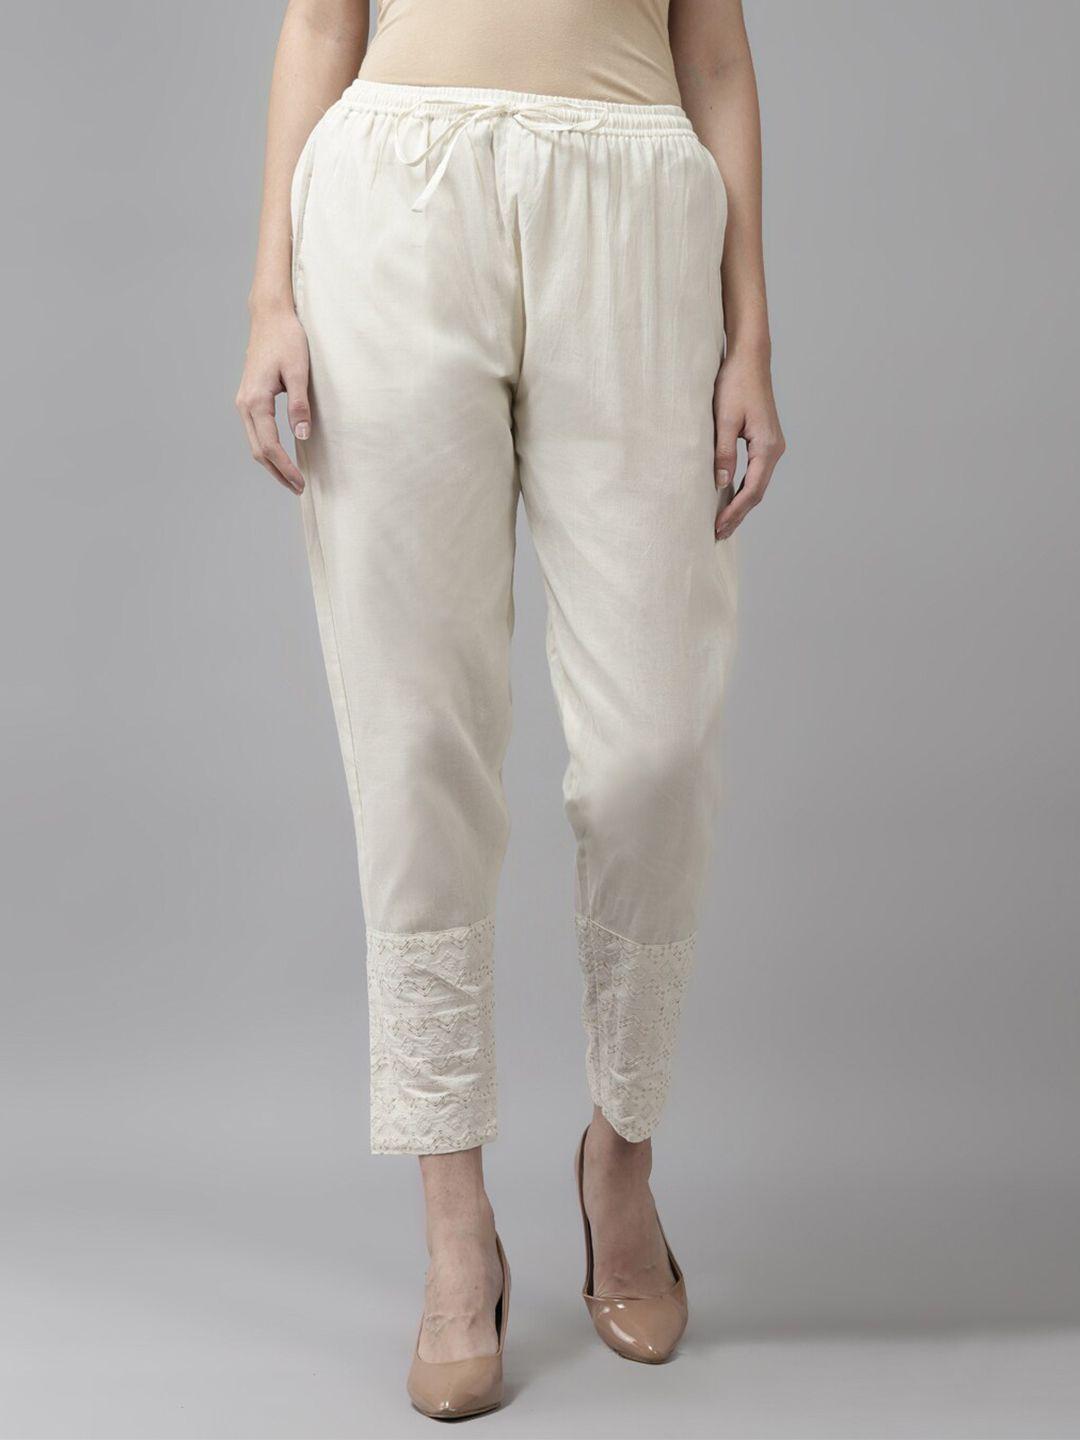 baesd women embroidered cotton trousers